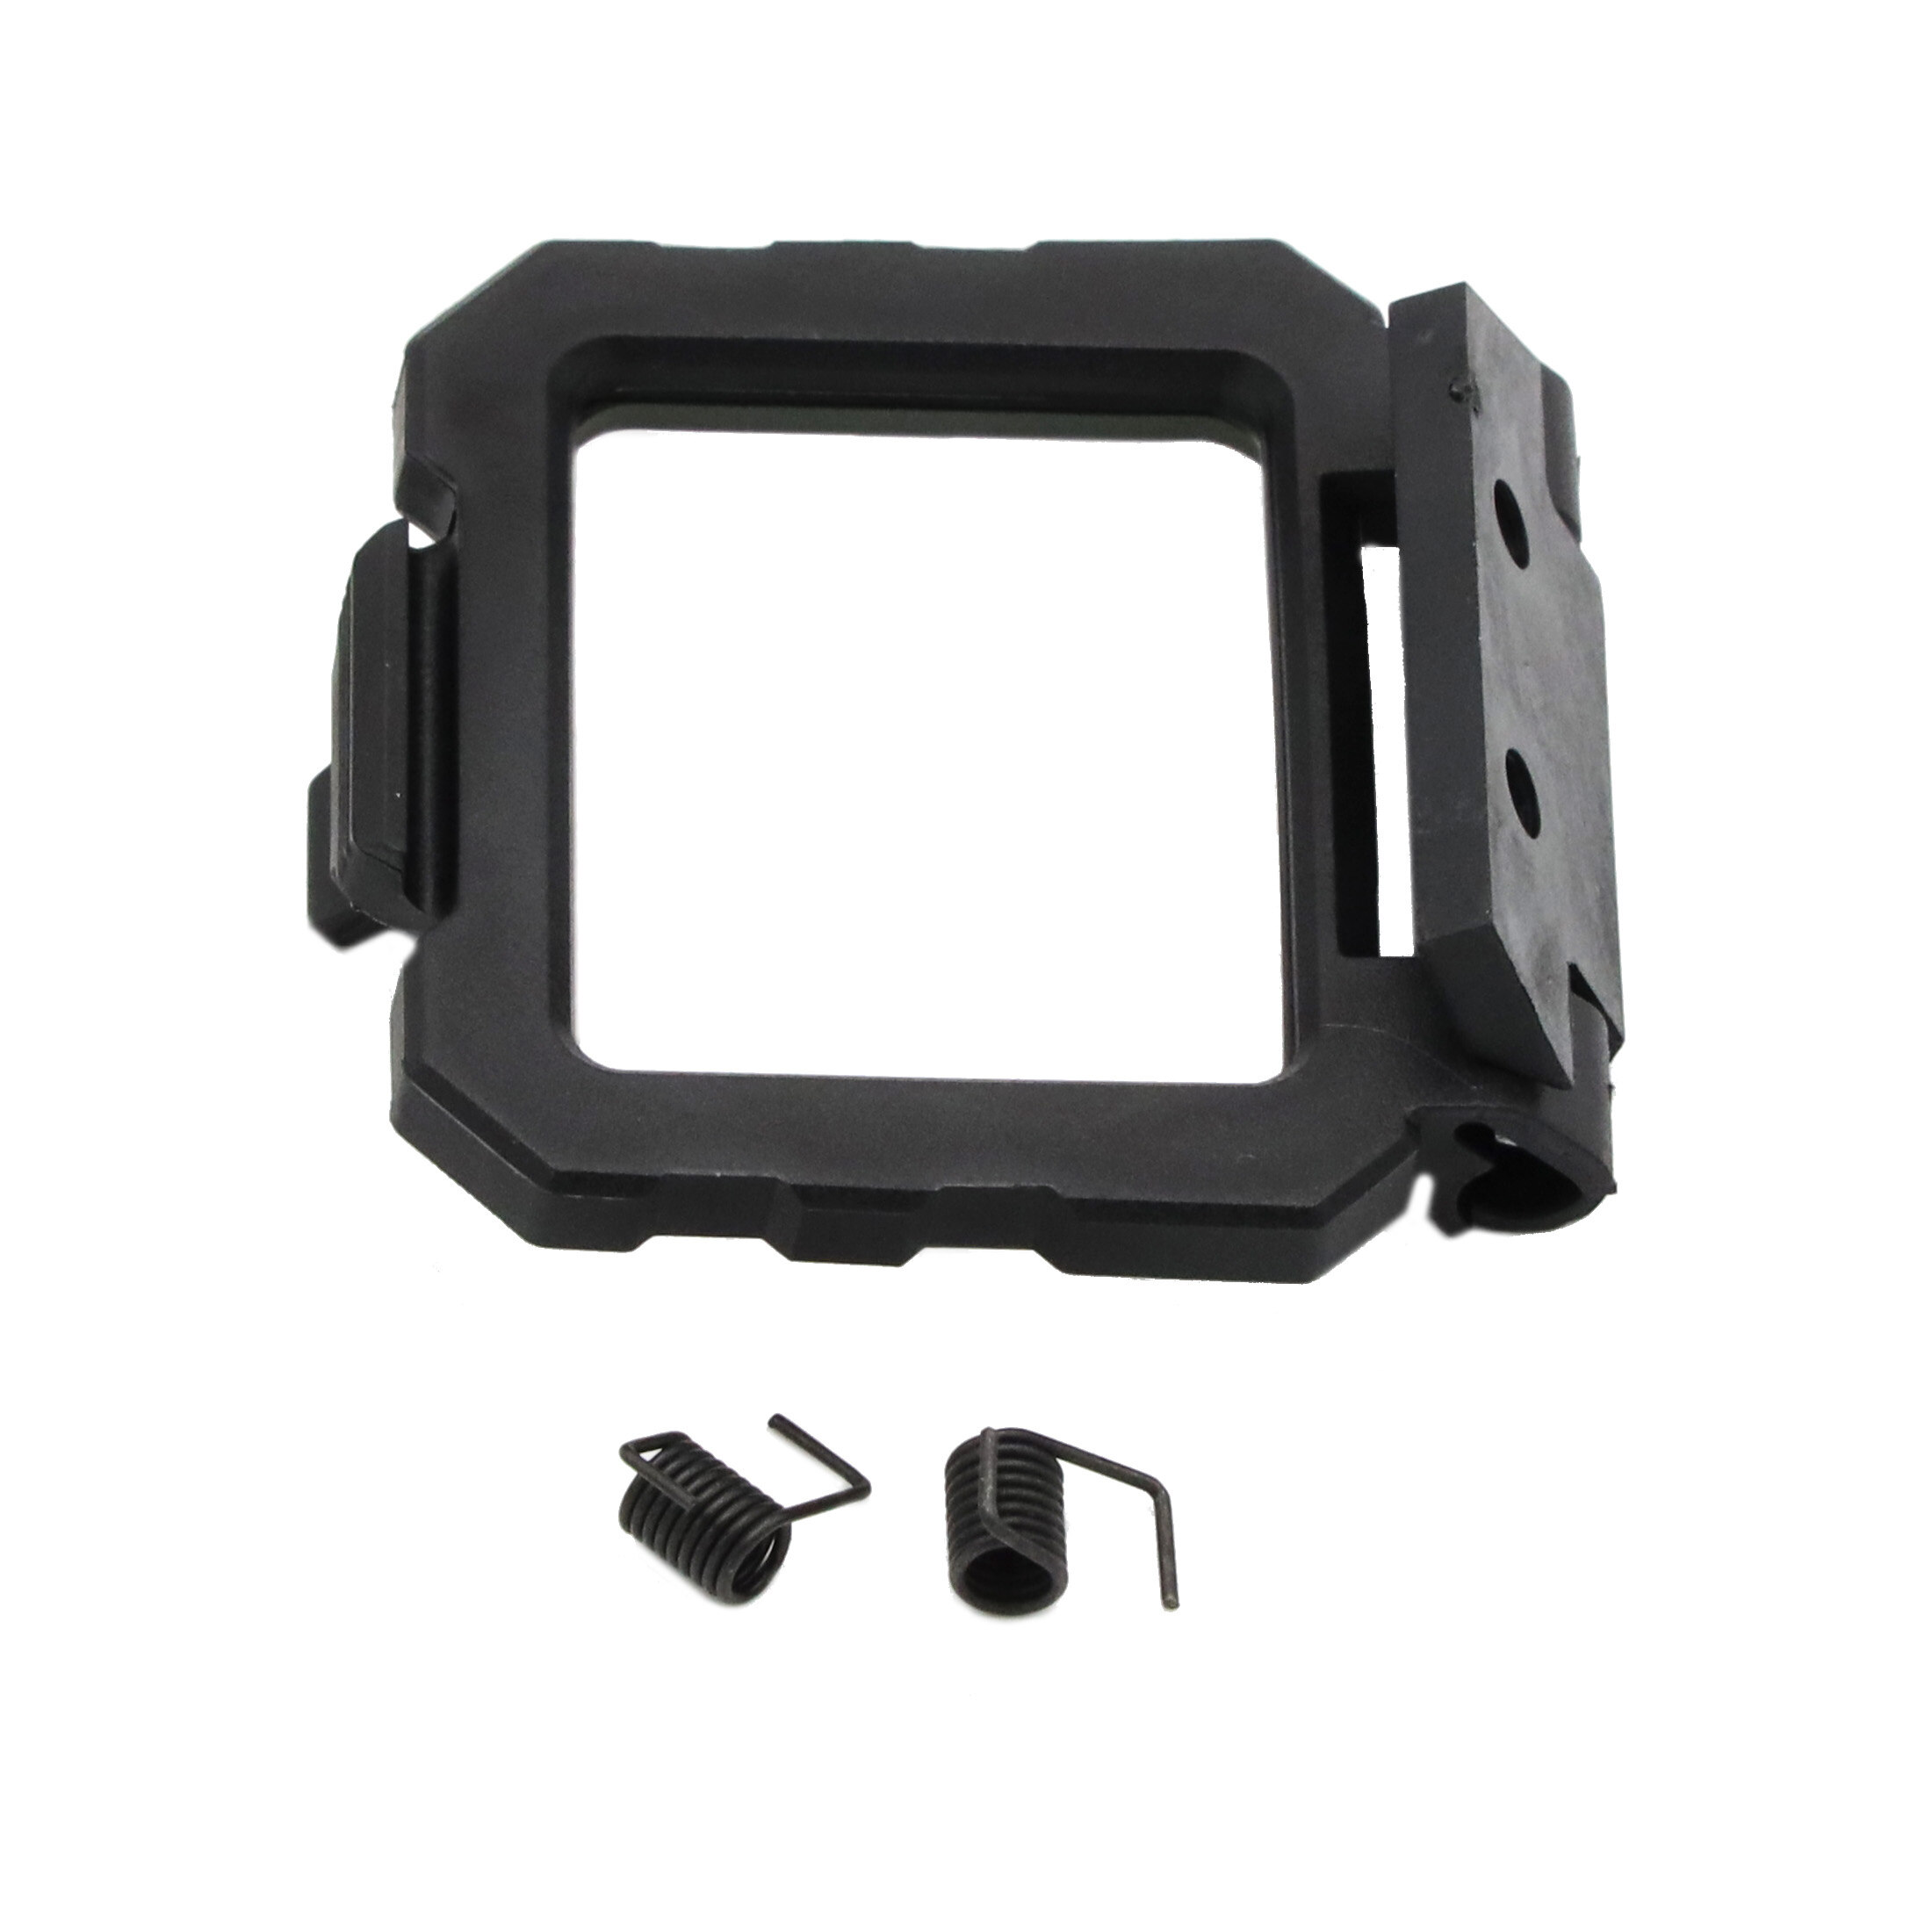 Holosun Flip Cap glass AEMS, accessory for Holosun red dot sights